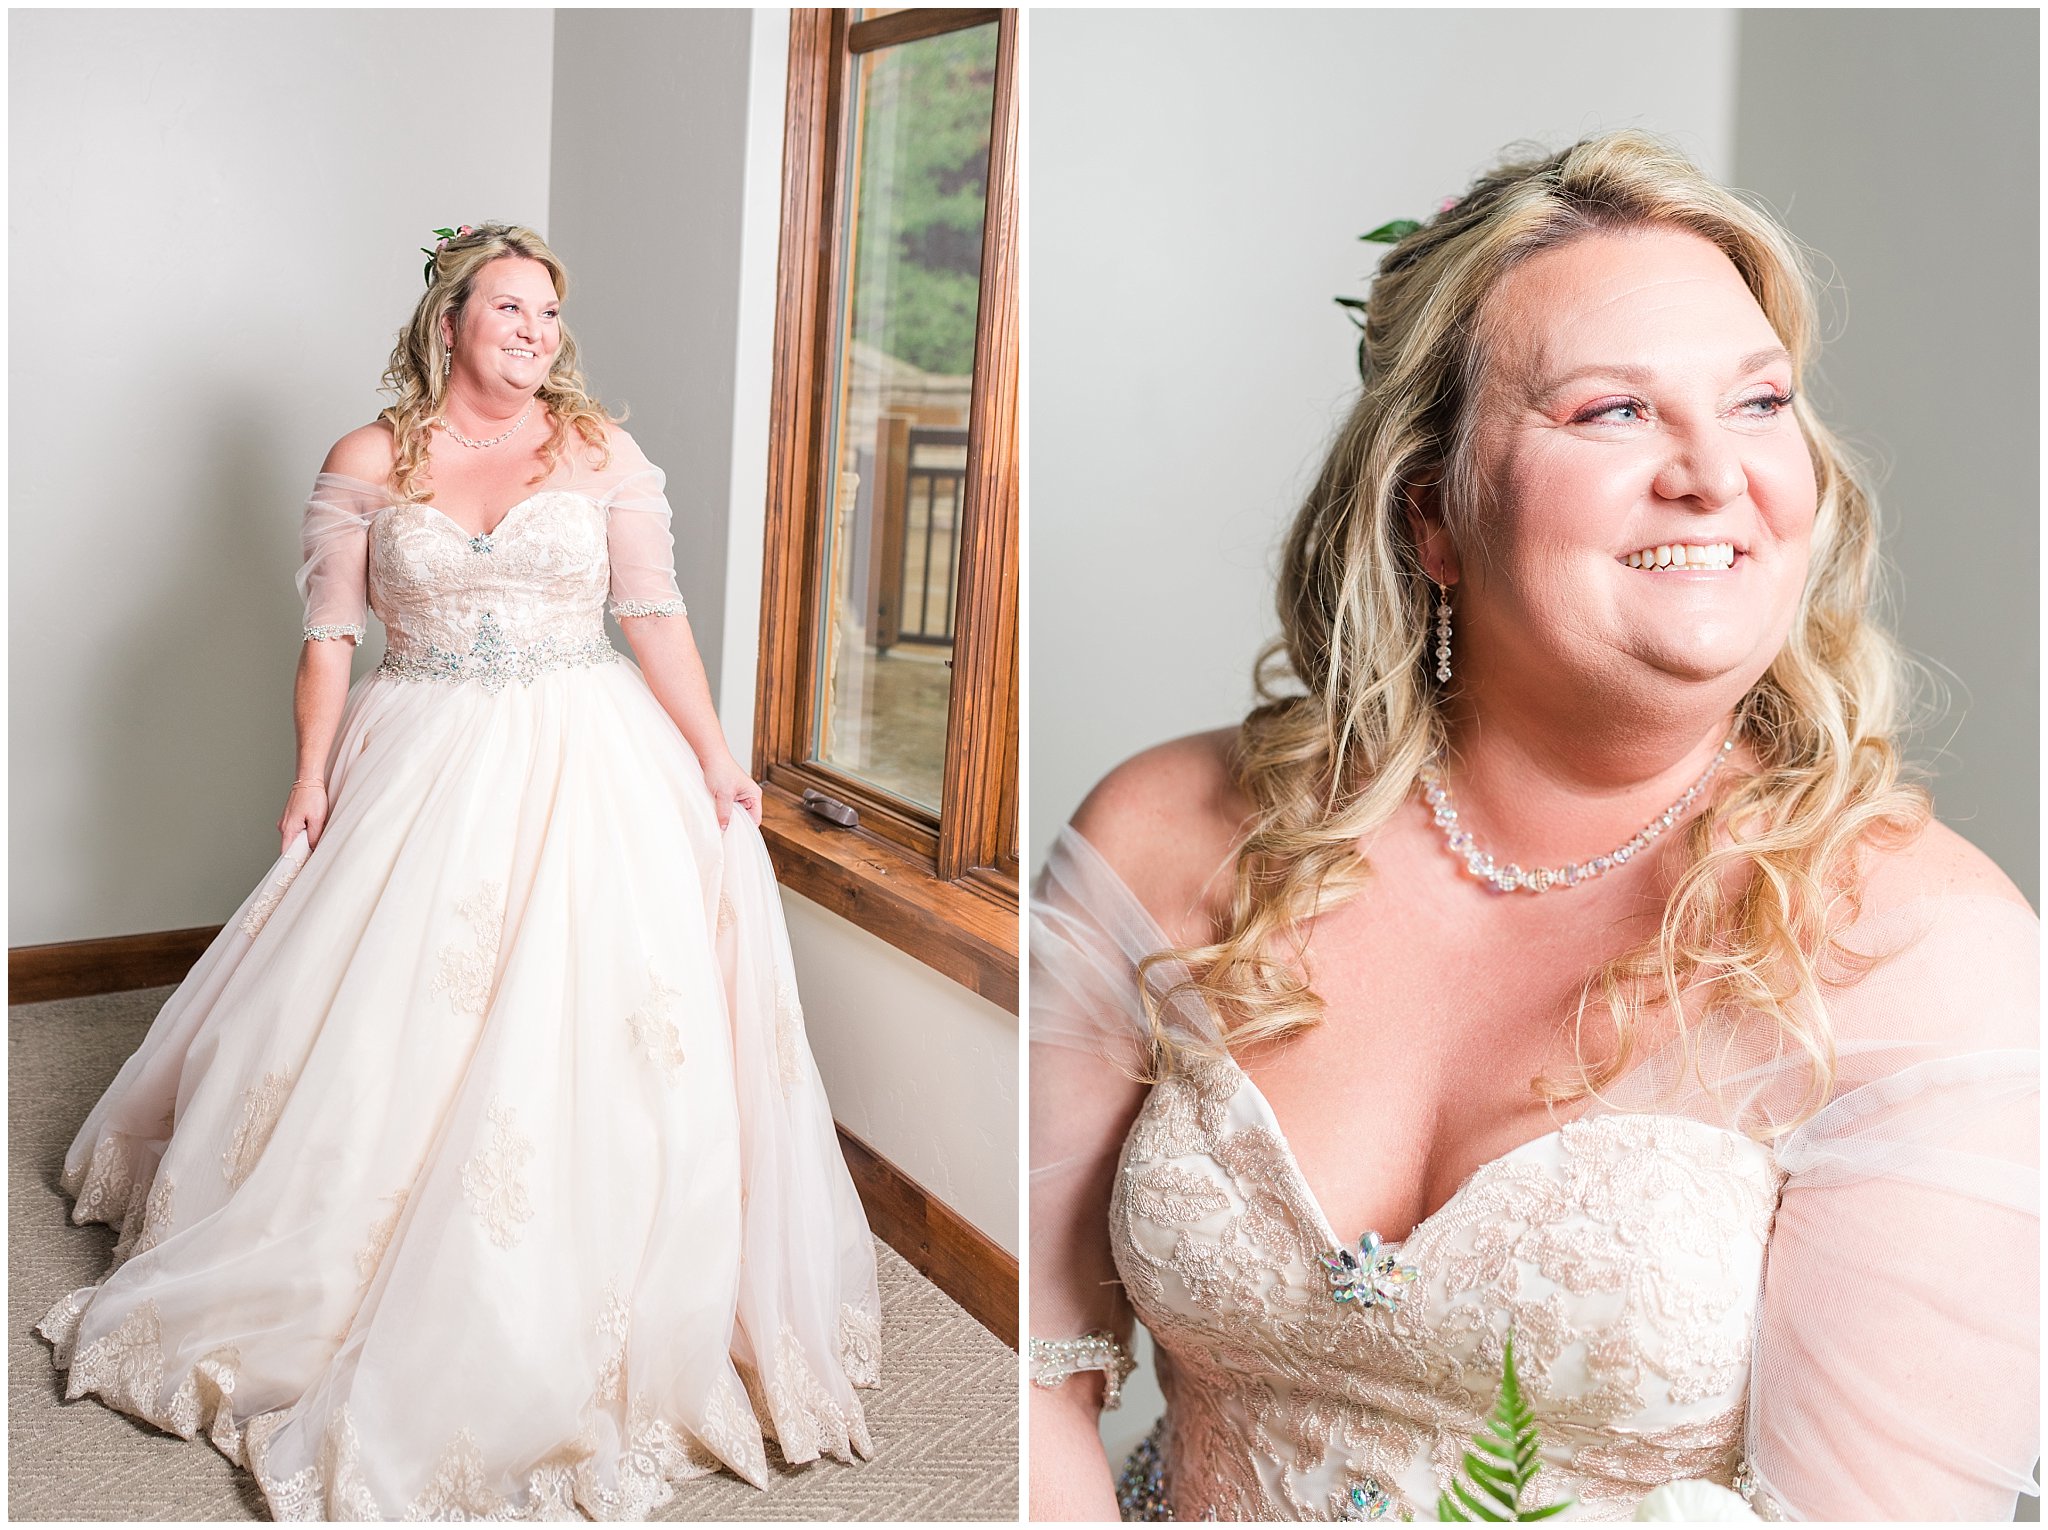 Bride getting ready | Park City Wedding at the Hyatt Centric | Jessie and Dallin Photography